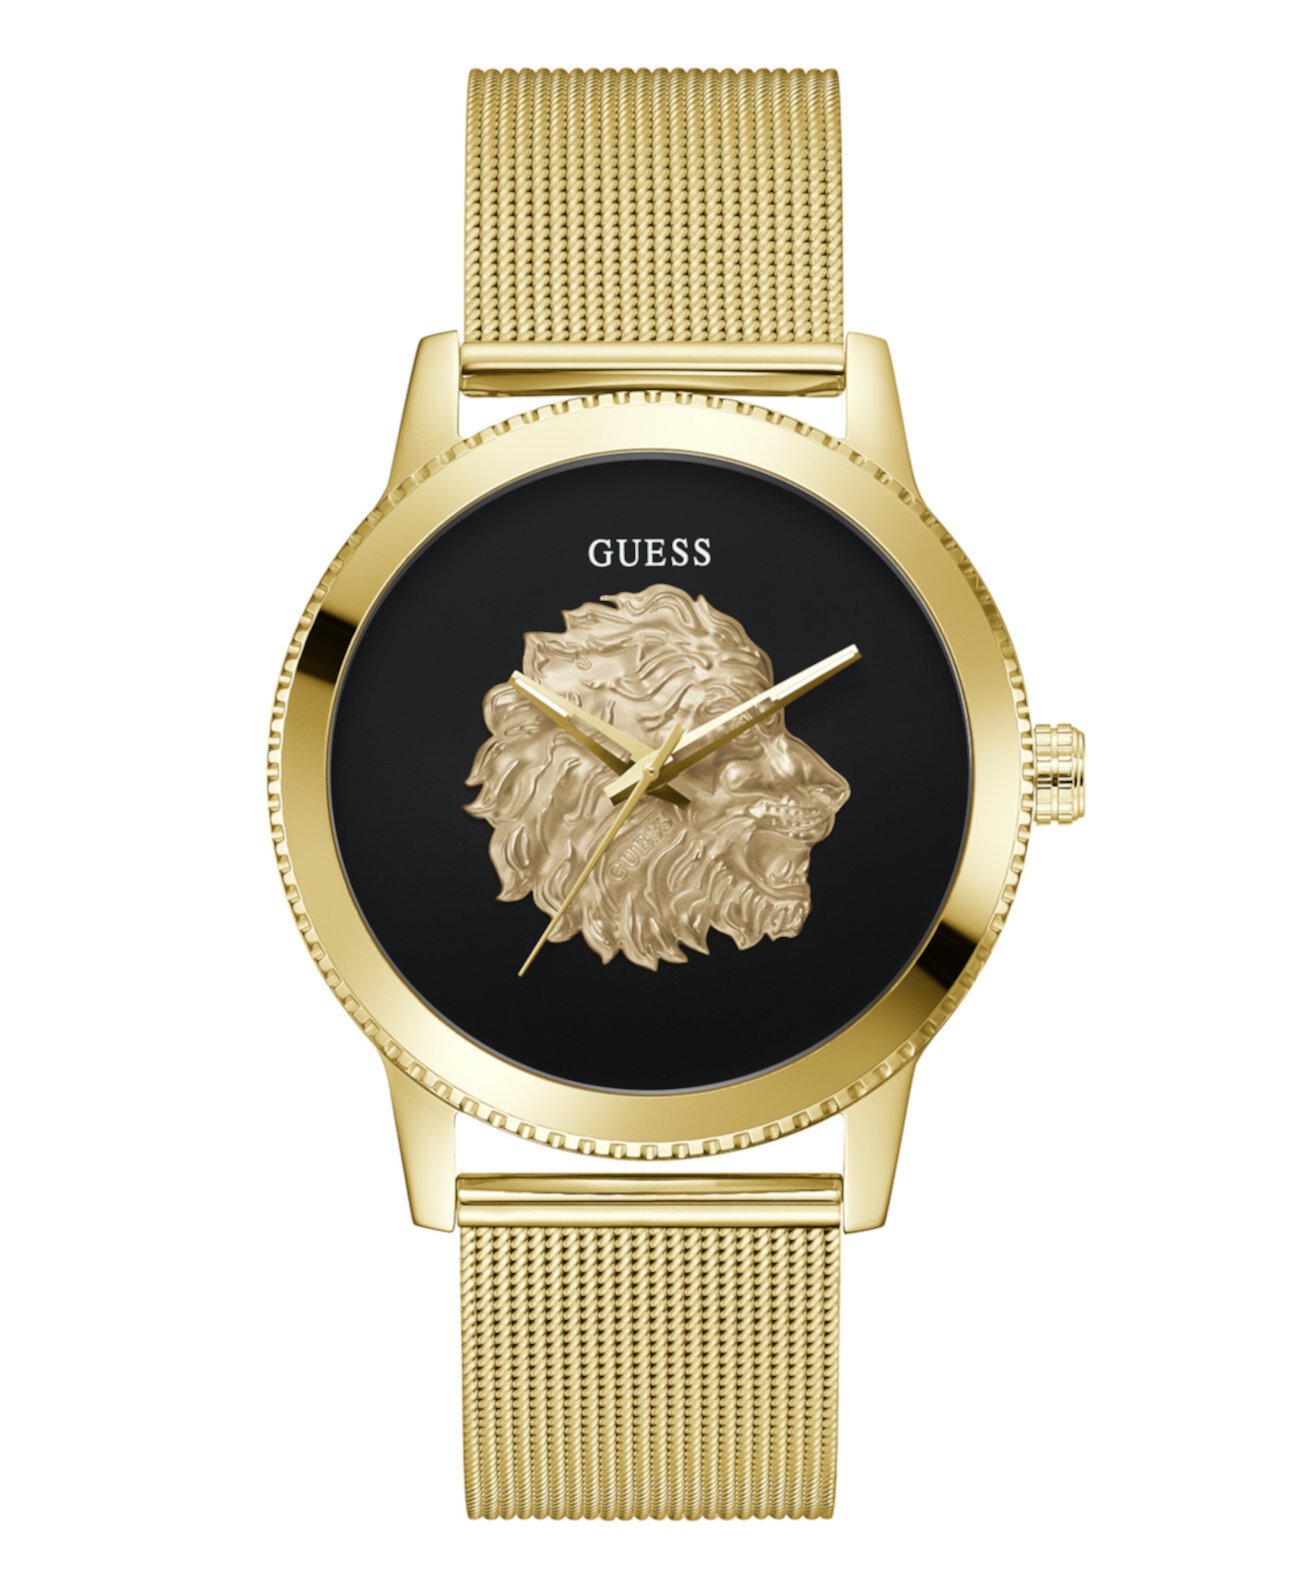 Men's Analog Gold-Tone Stainless Steel Mesh Watch, 44mm GUESS